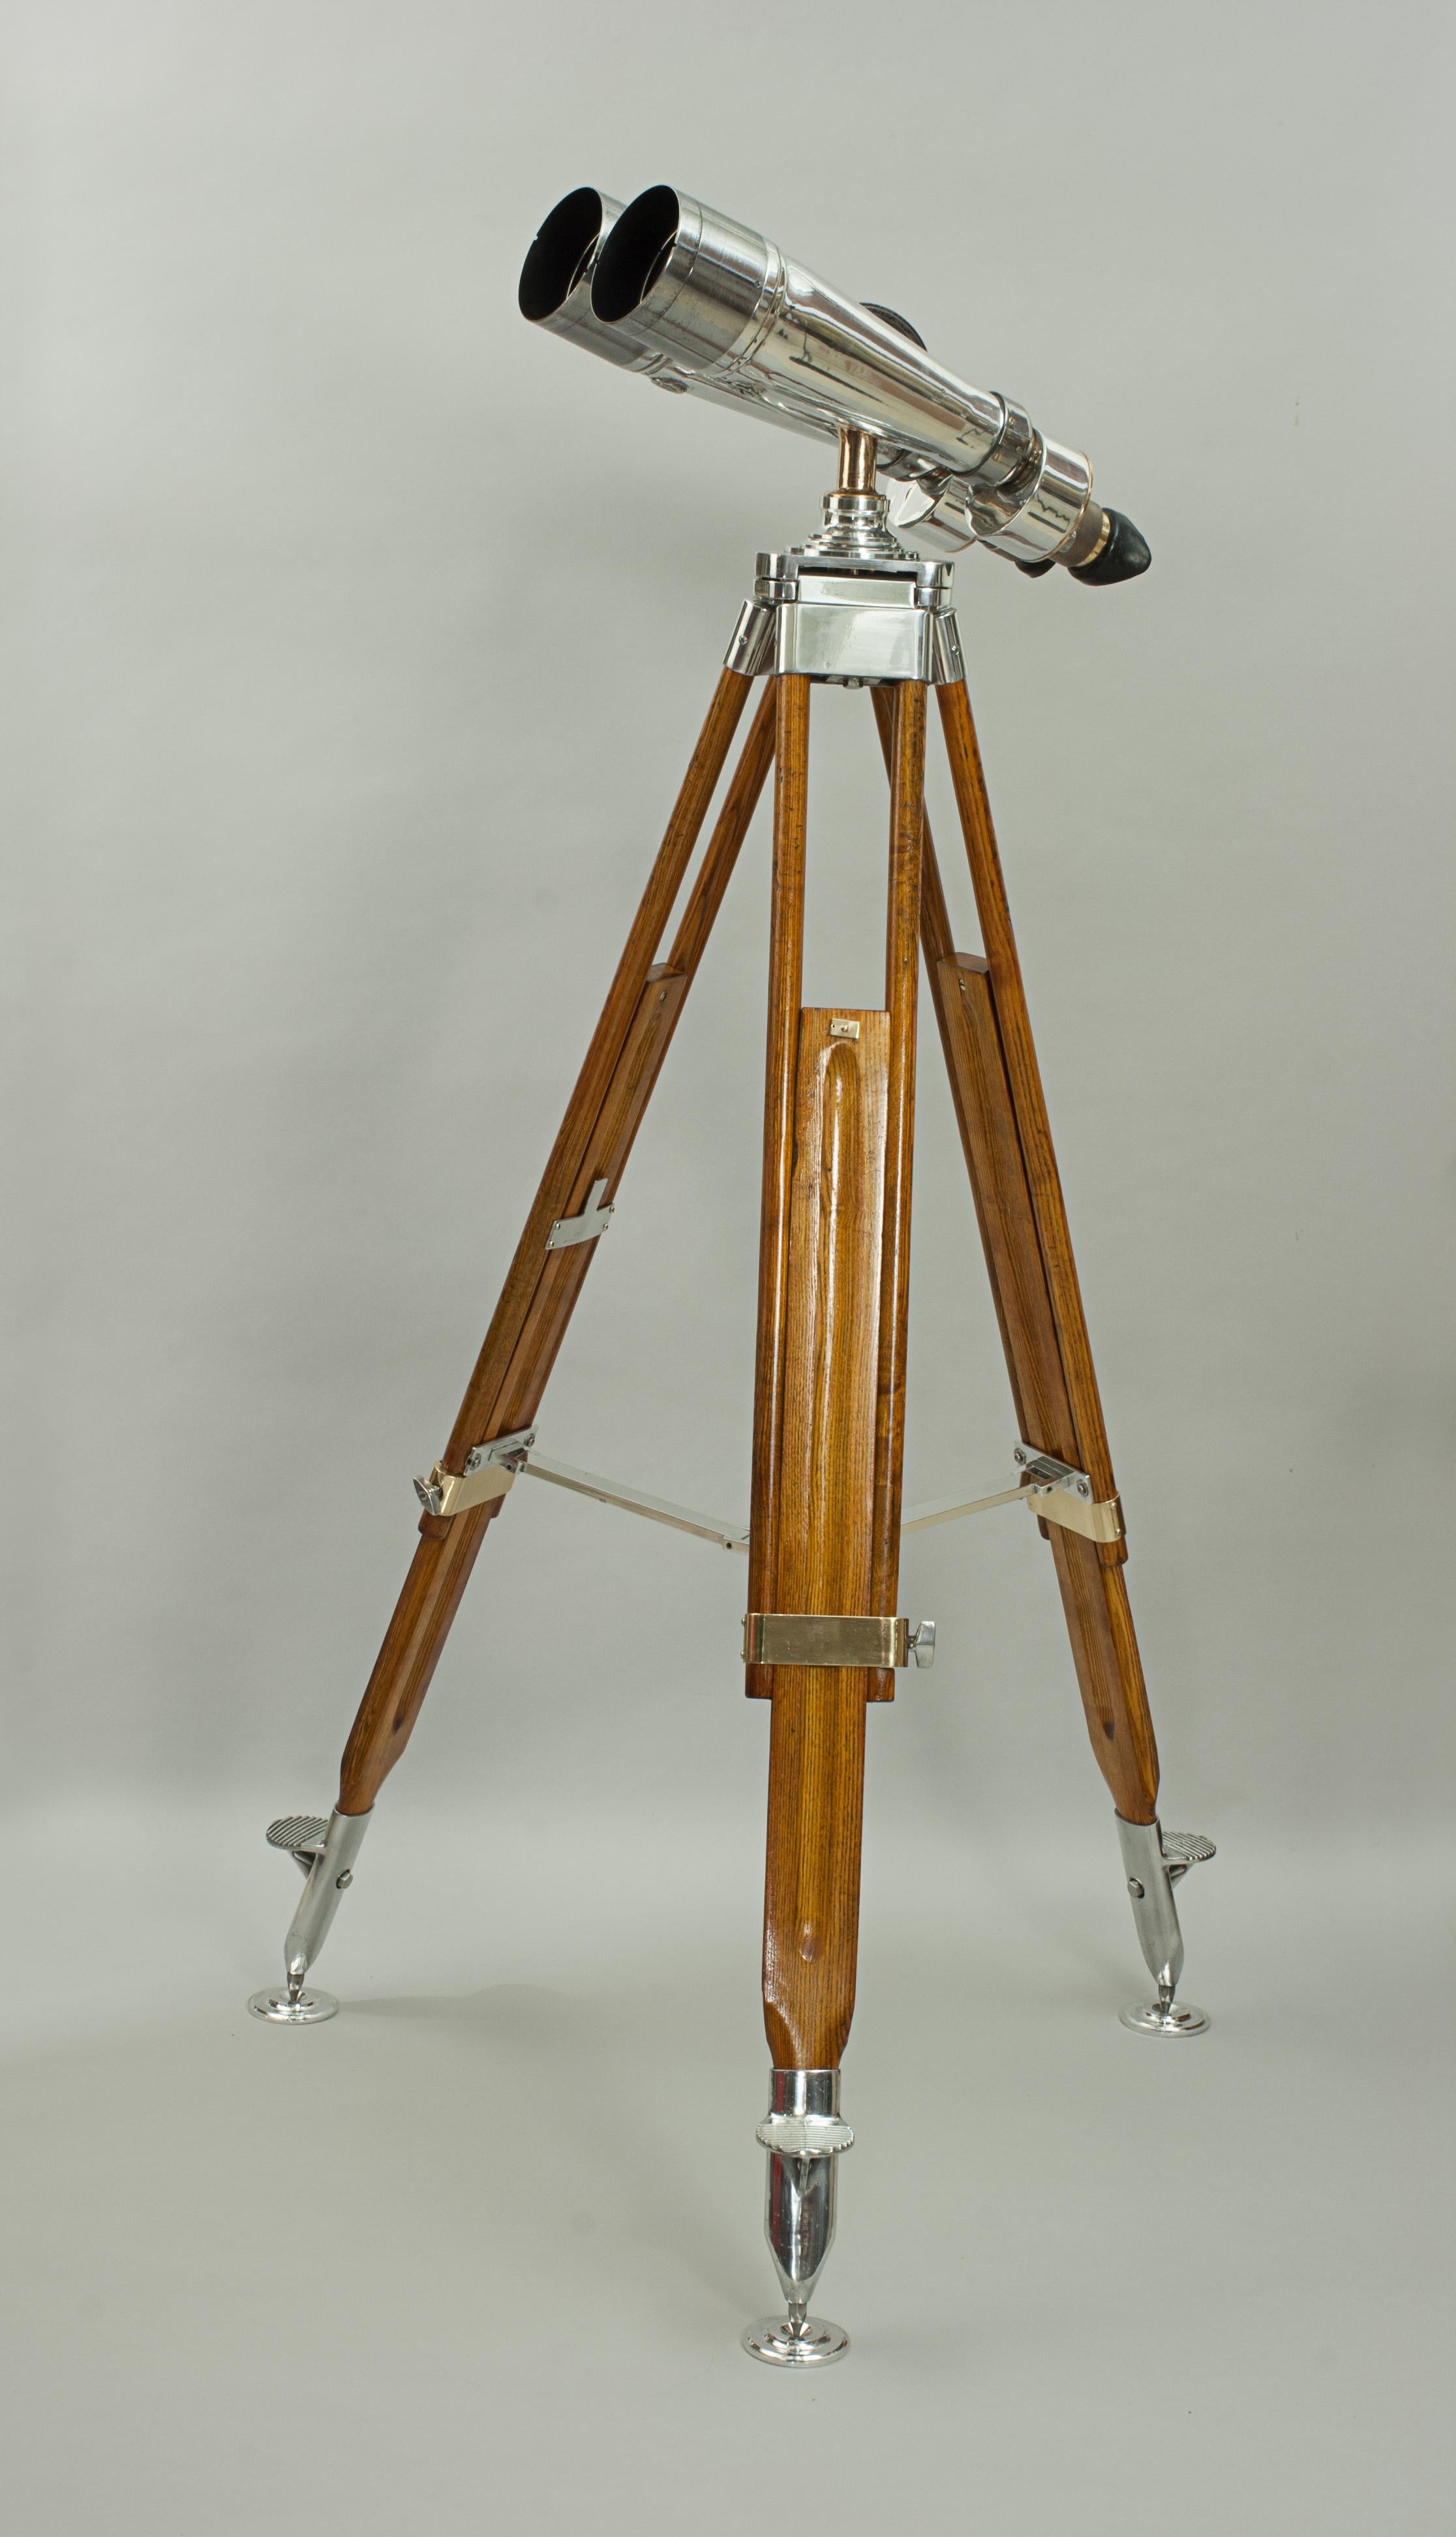 A large pair of Japanese ex-navy observation binoculars mounted on a vintage adjustable wooden Carl Zeiss design tripod. The WWII marine binoculars with 4º incline eyepieces are marked '15 X 4º, TOKO, No. 1731'. These binoculars are predominately